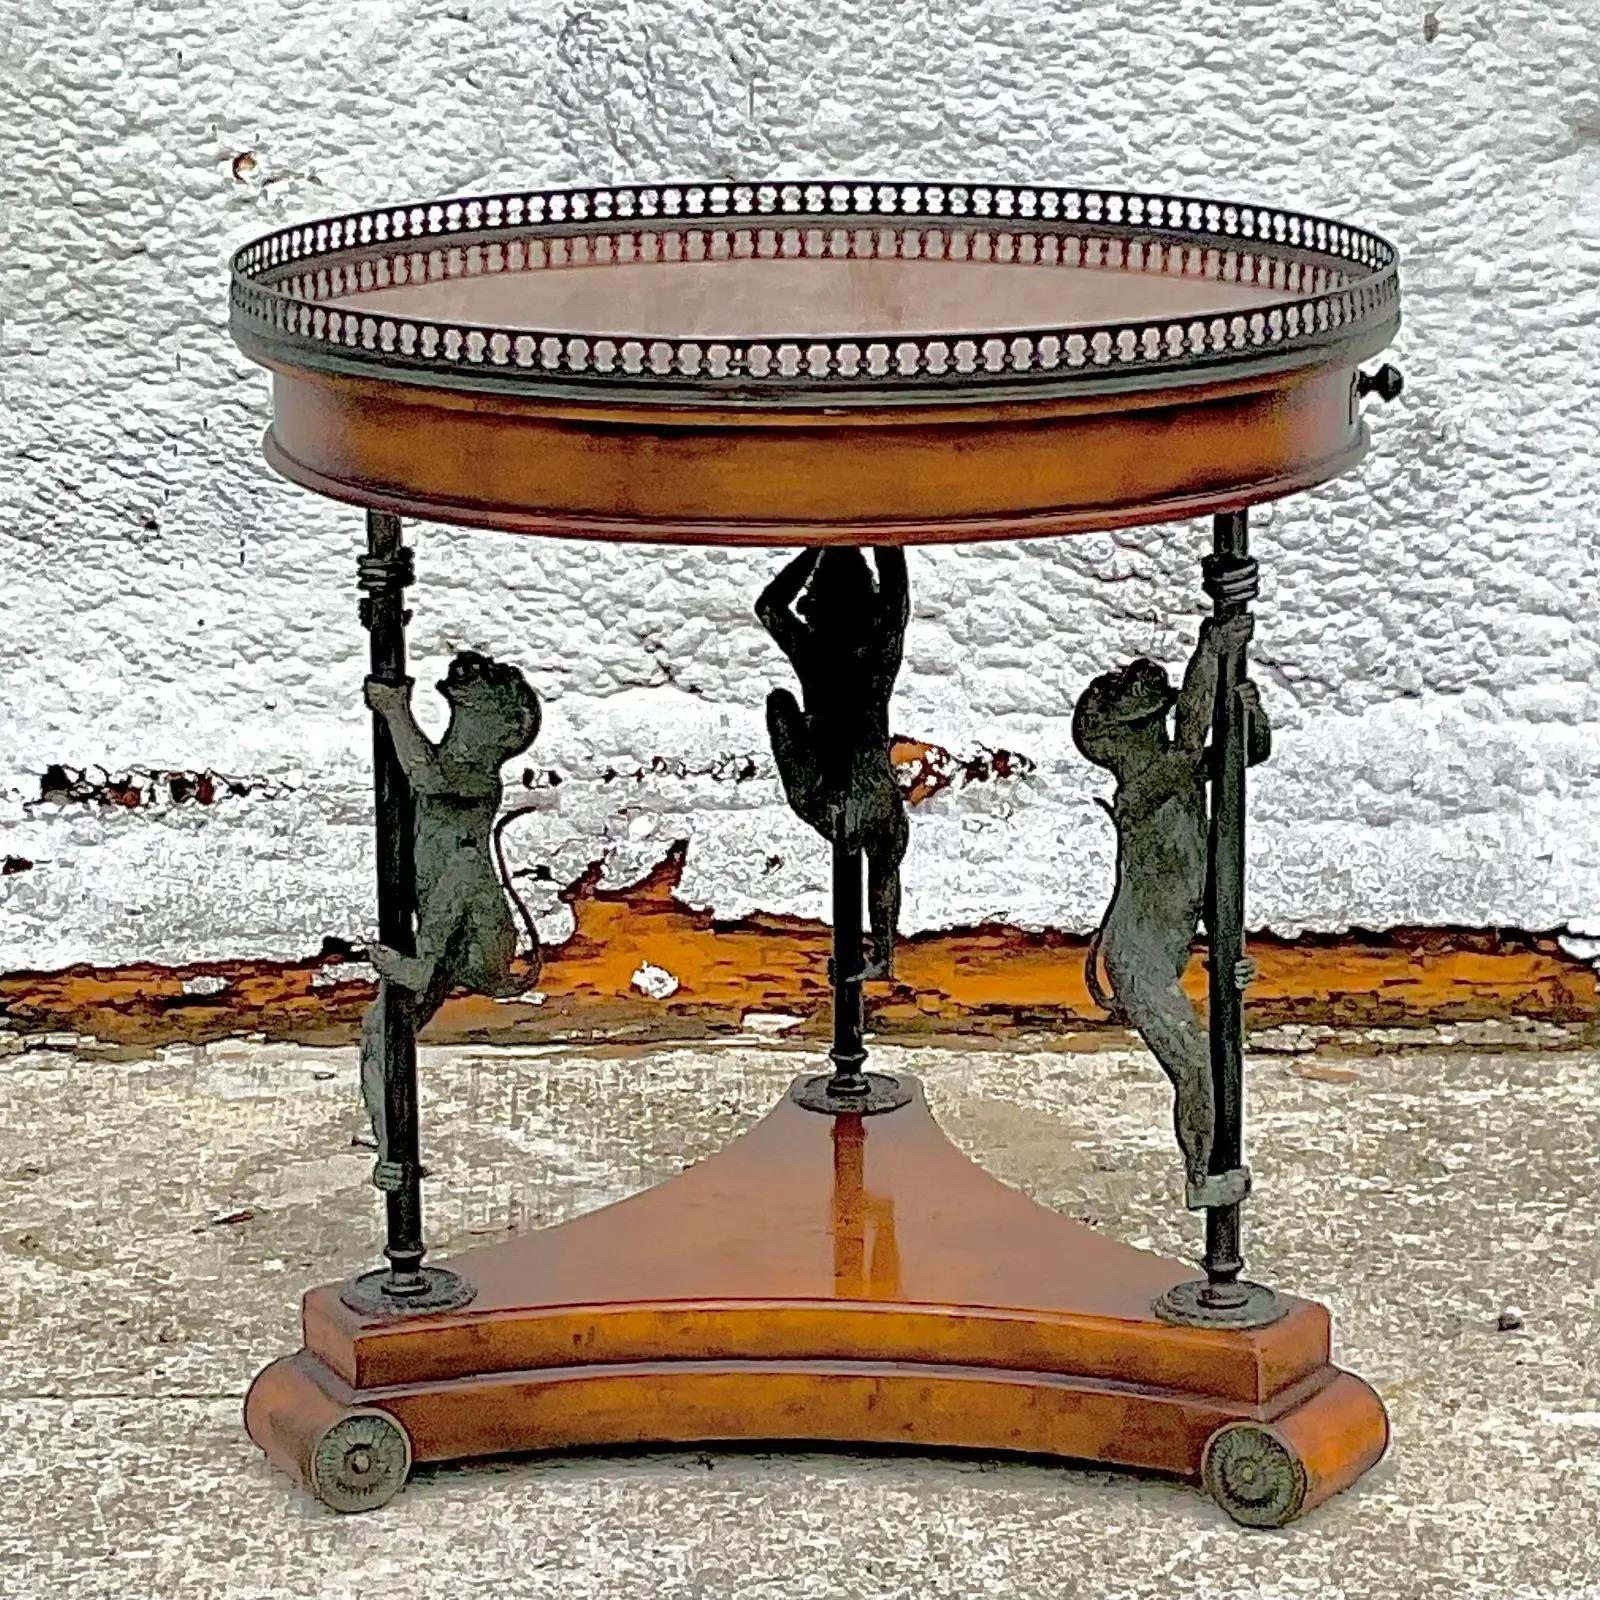 Fantastic vintage Regency side table. Beautiful Burl wood with leather detail. Chic monkey appliqué Bouilotte shape with a pull out drinks tray. Acquired from a Palm Beach estate.